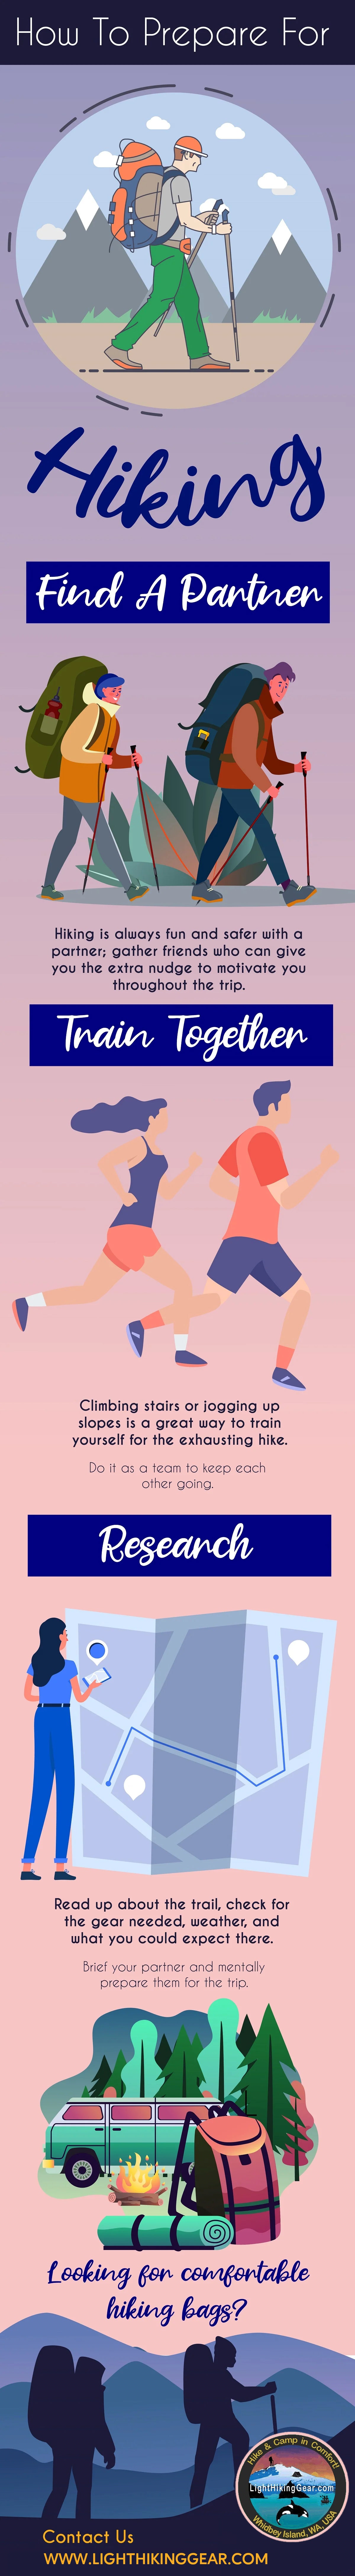 How To Prepare For Hiking | Infographic